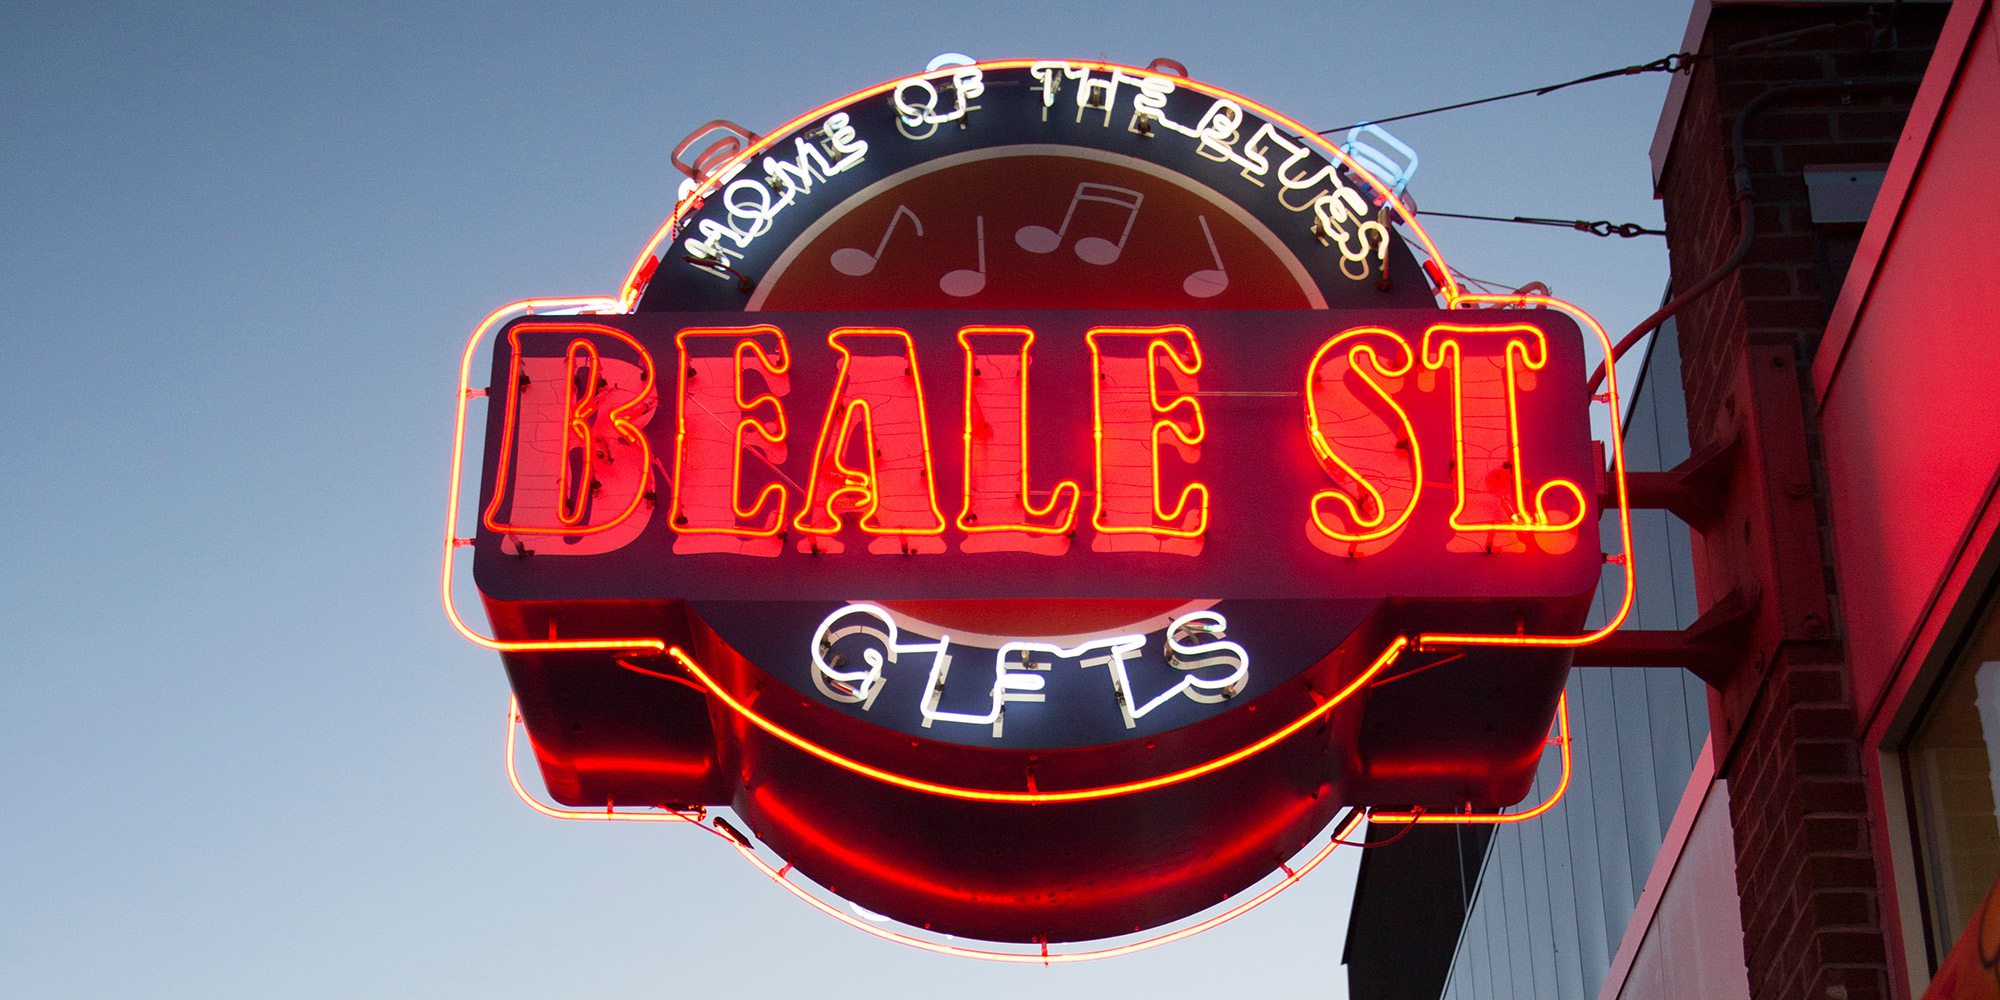 Beale Street in Memphis, Tennessee